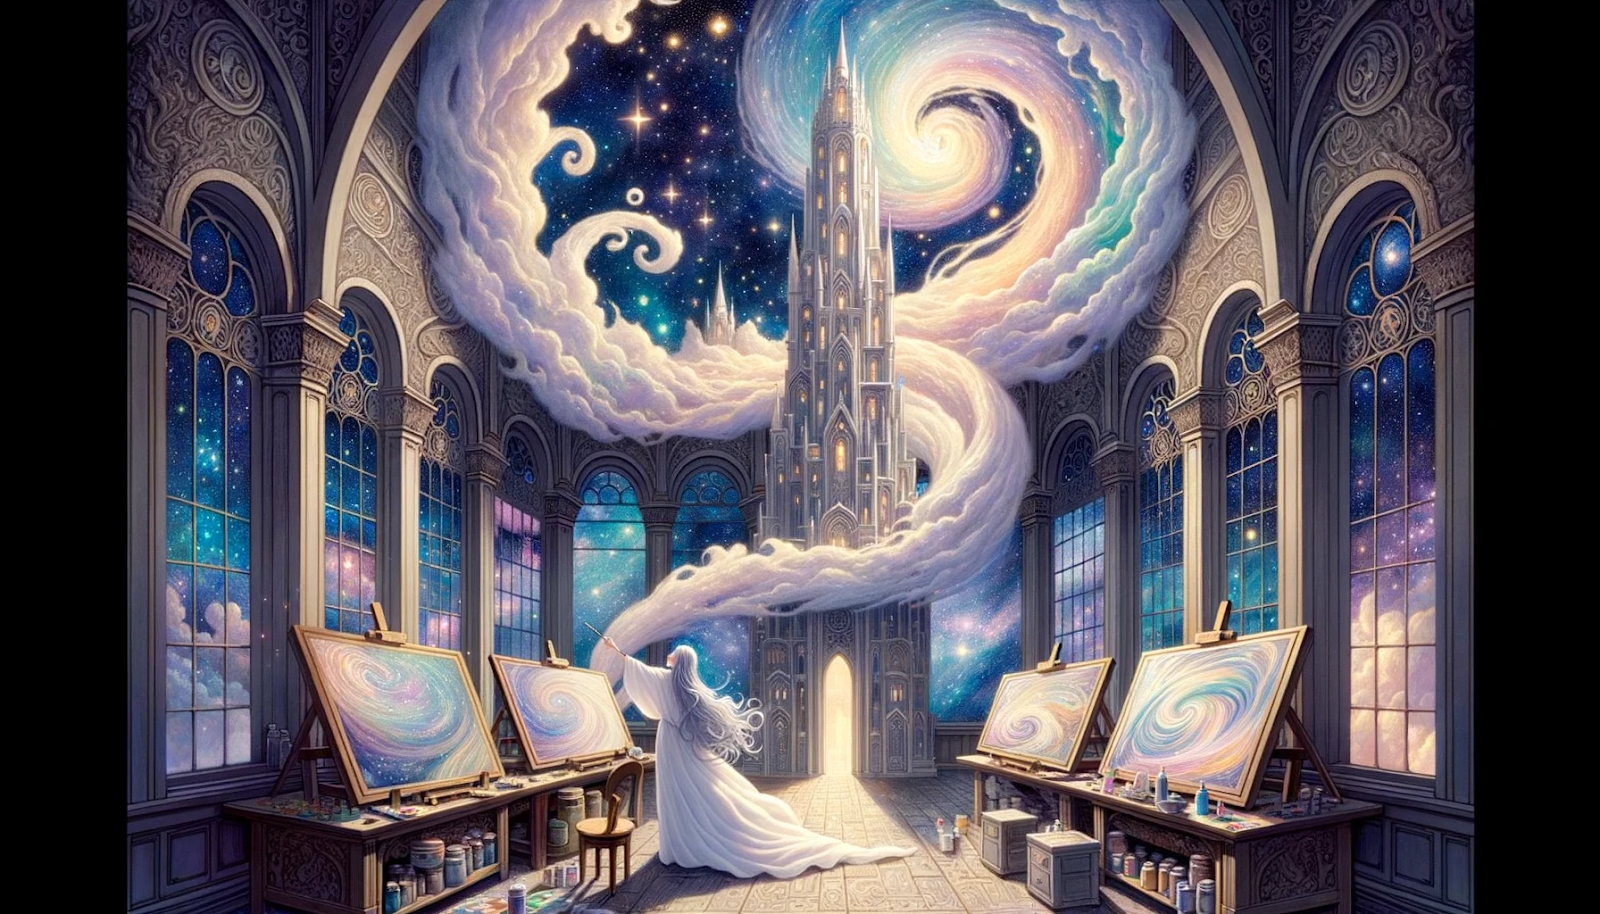 Illustration of a tall, ornate tower set against a backdrop of twinkling stars and nebulous clouds. Inside the tower is Seraphine's expansive studio, filled with shifting canvases. Seraphine, with flowing silver hair and ethereal robes, is meticulously painting on one canvas. An array of swirling colors envelops the room, casting a soft, magical glow.